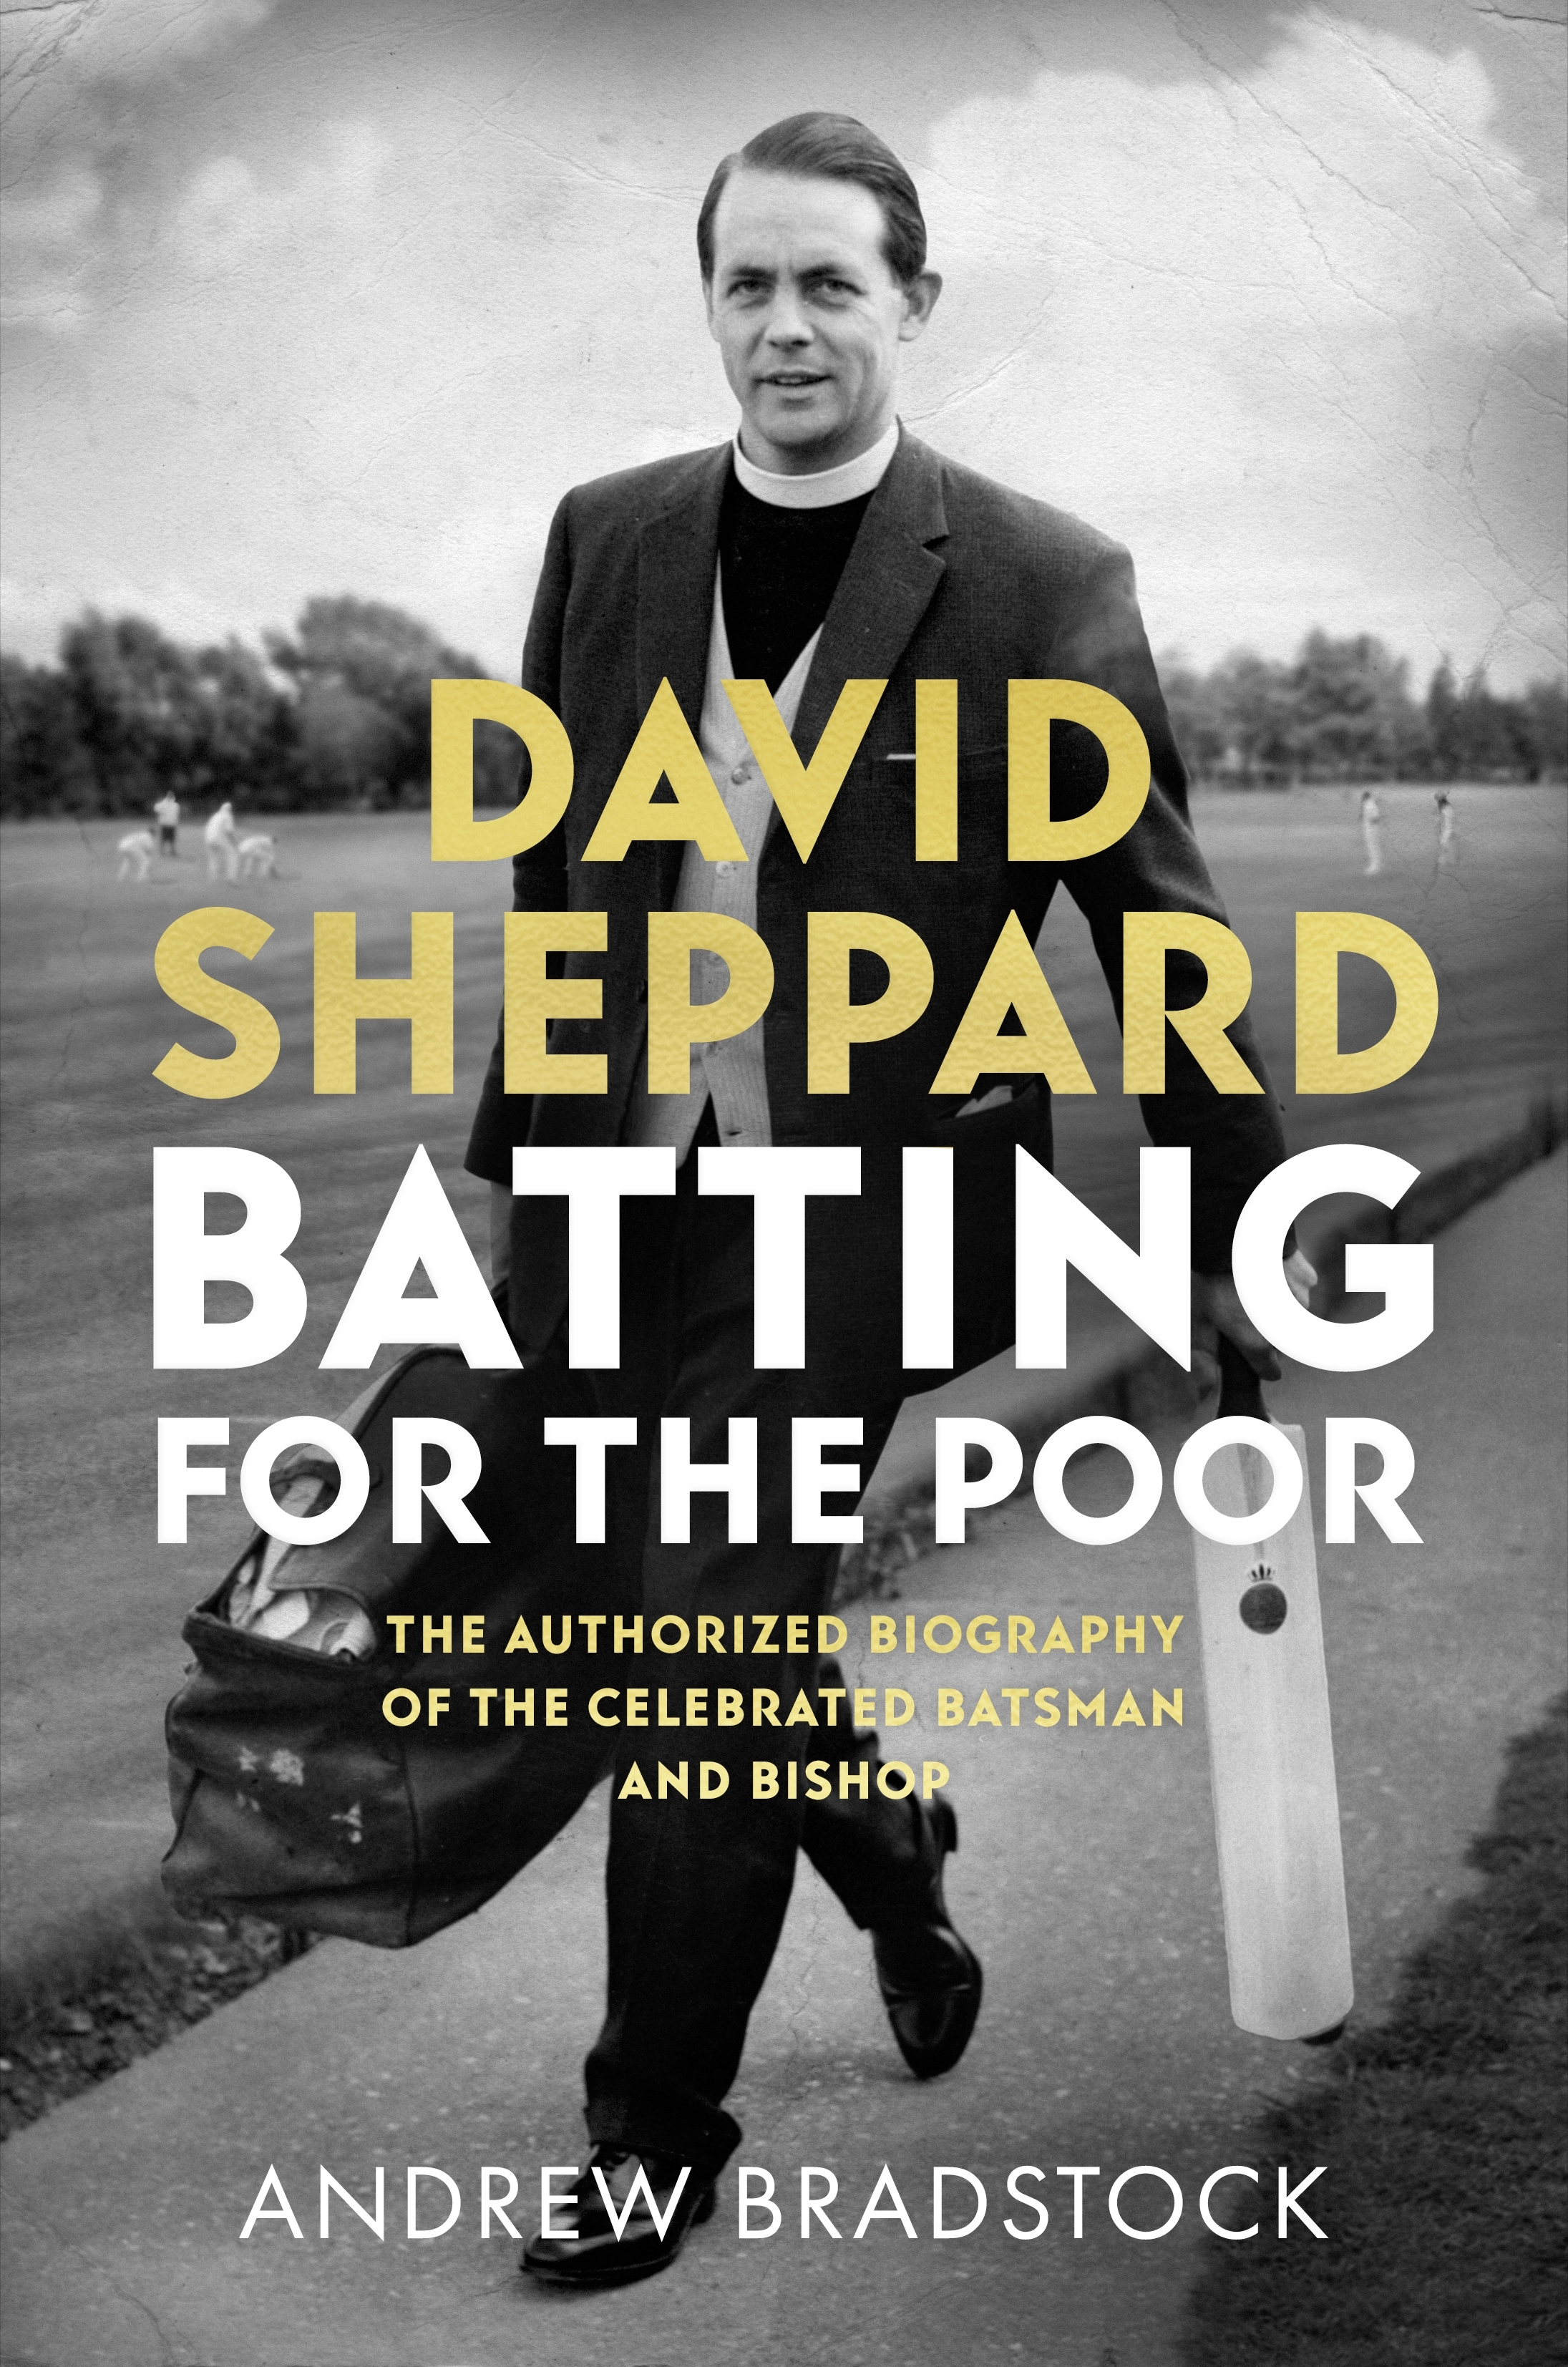 David Sheppard: Batting for the Poor